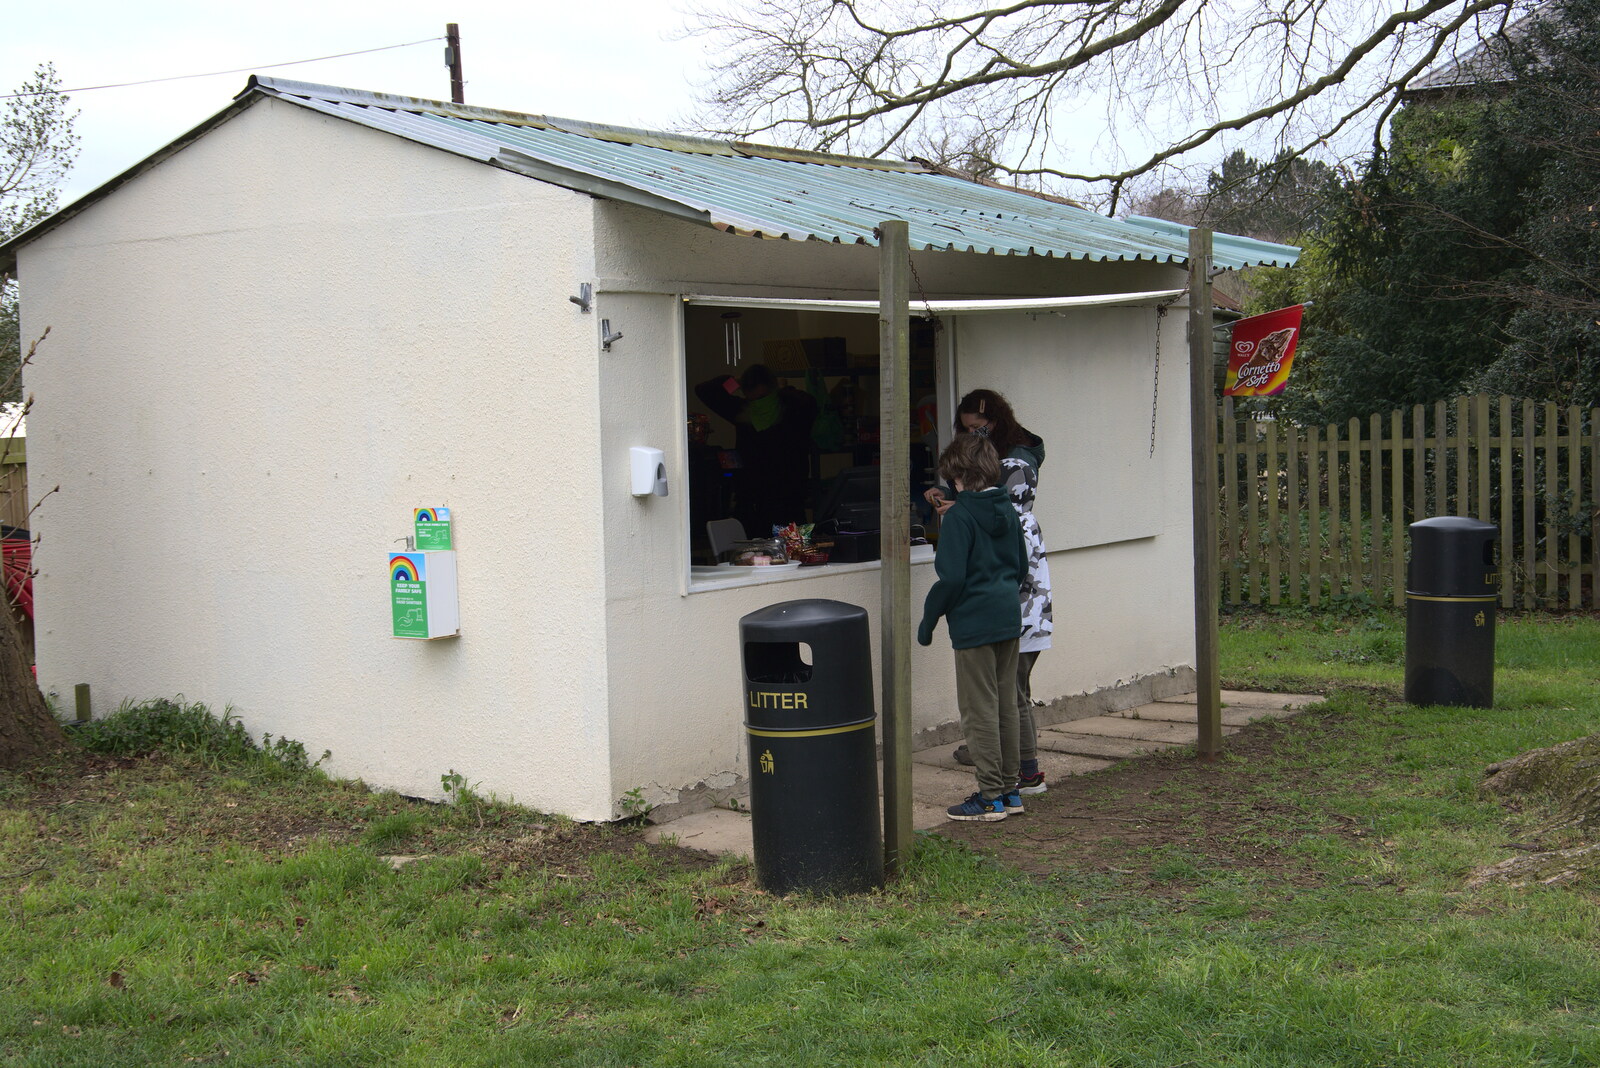 The little café in the playground from A Return to Bressingham Steam and Gardens, Bressingham, Norfolk - 28th March 2021